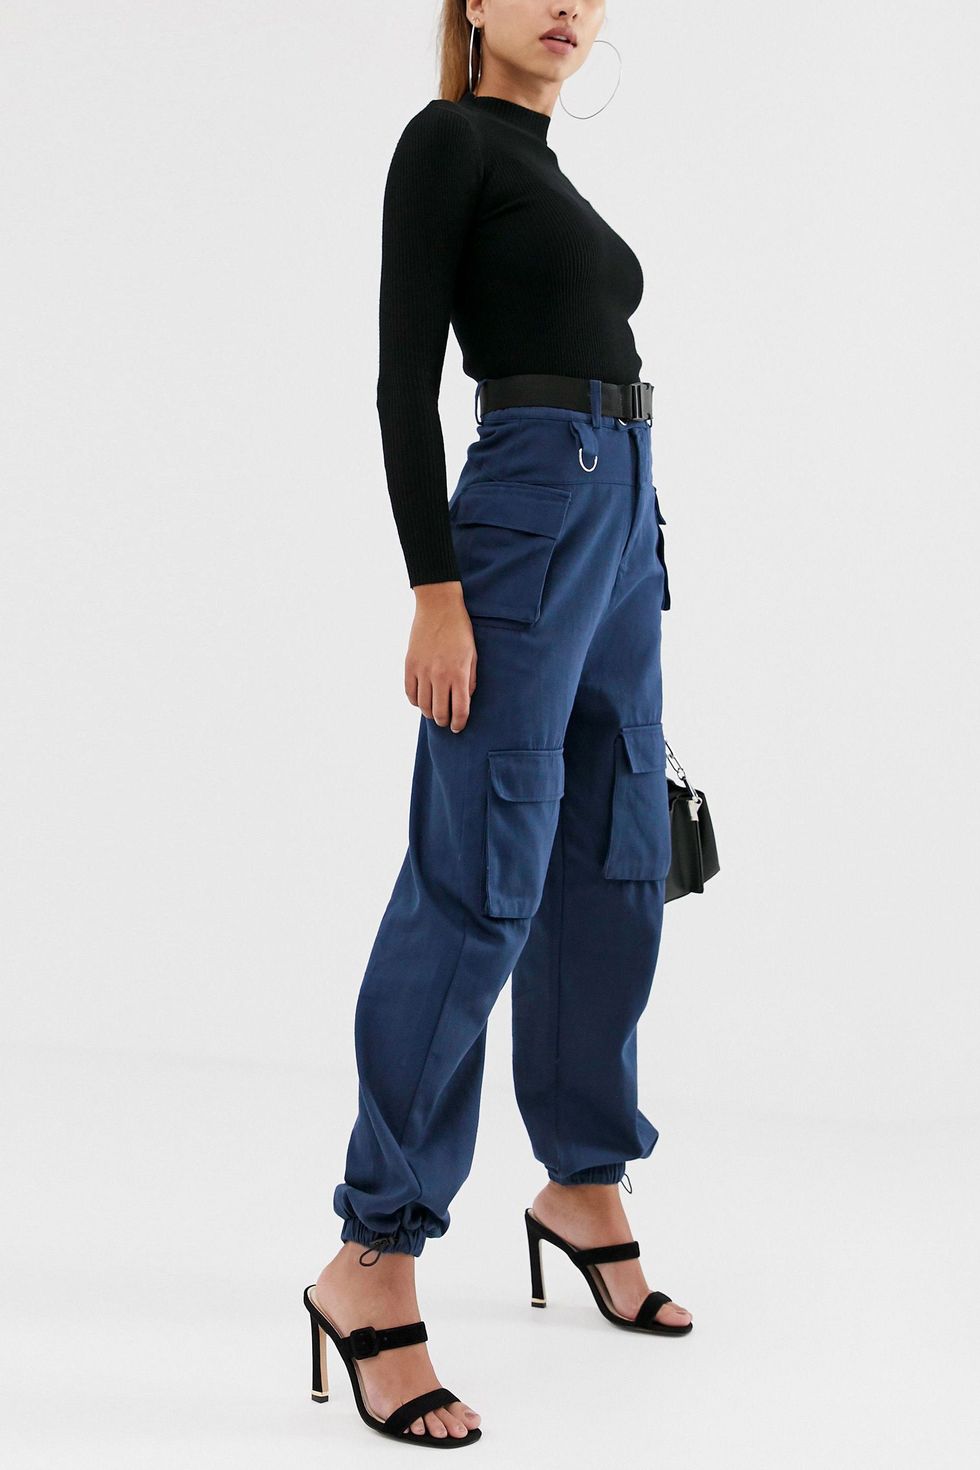 Missguided Grey Slinky Culottes, $24, Missguided